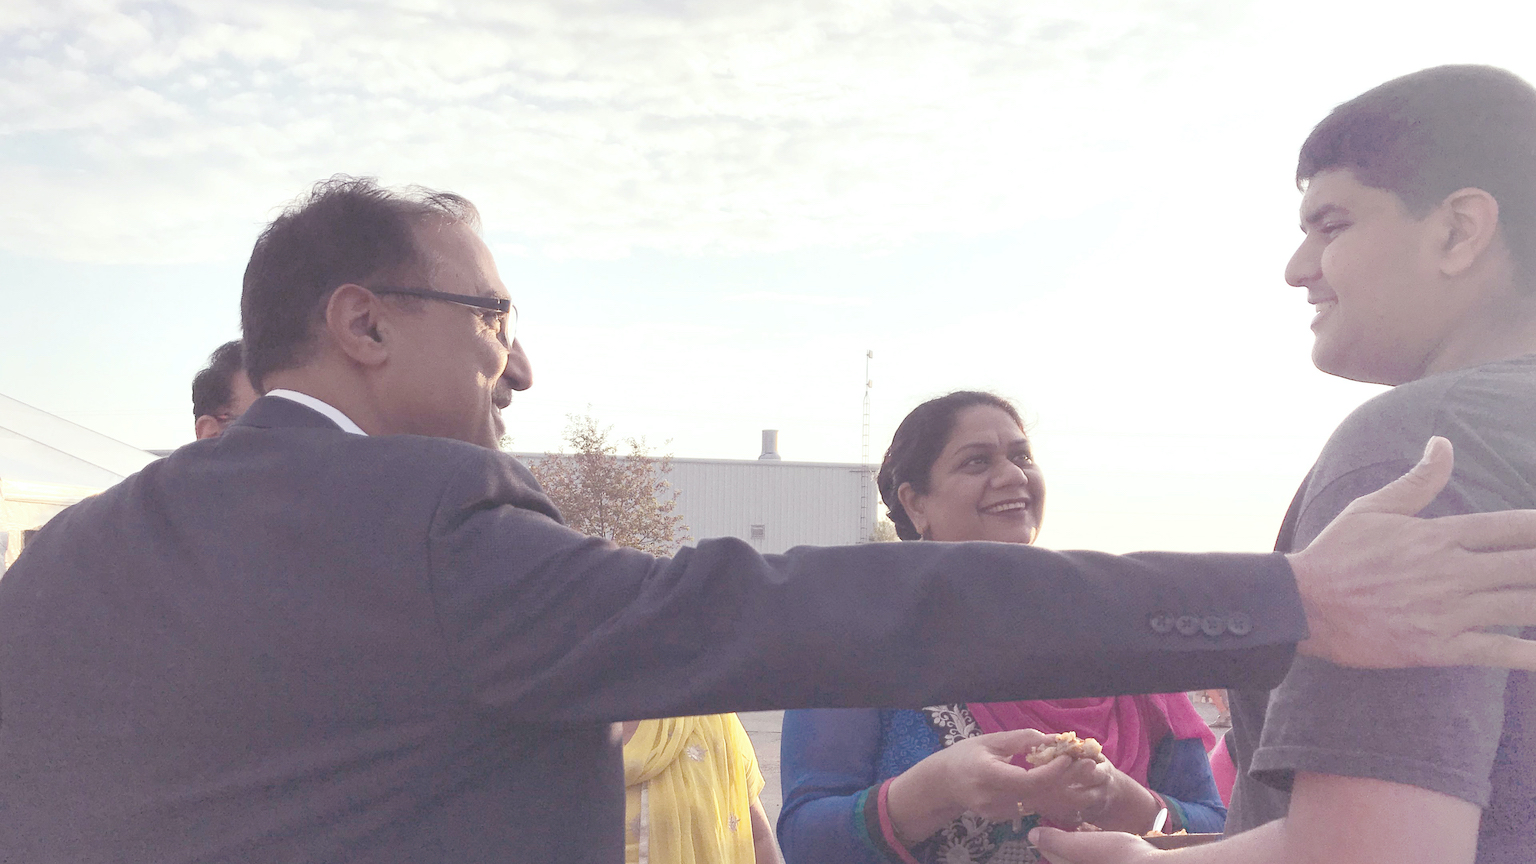 An image of Amarjeet Sohi reaching out and touching a young man's shoulder while a woman looks on, smiling.